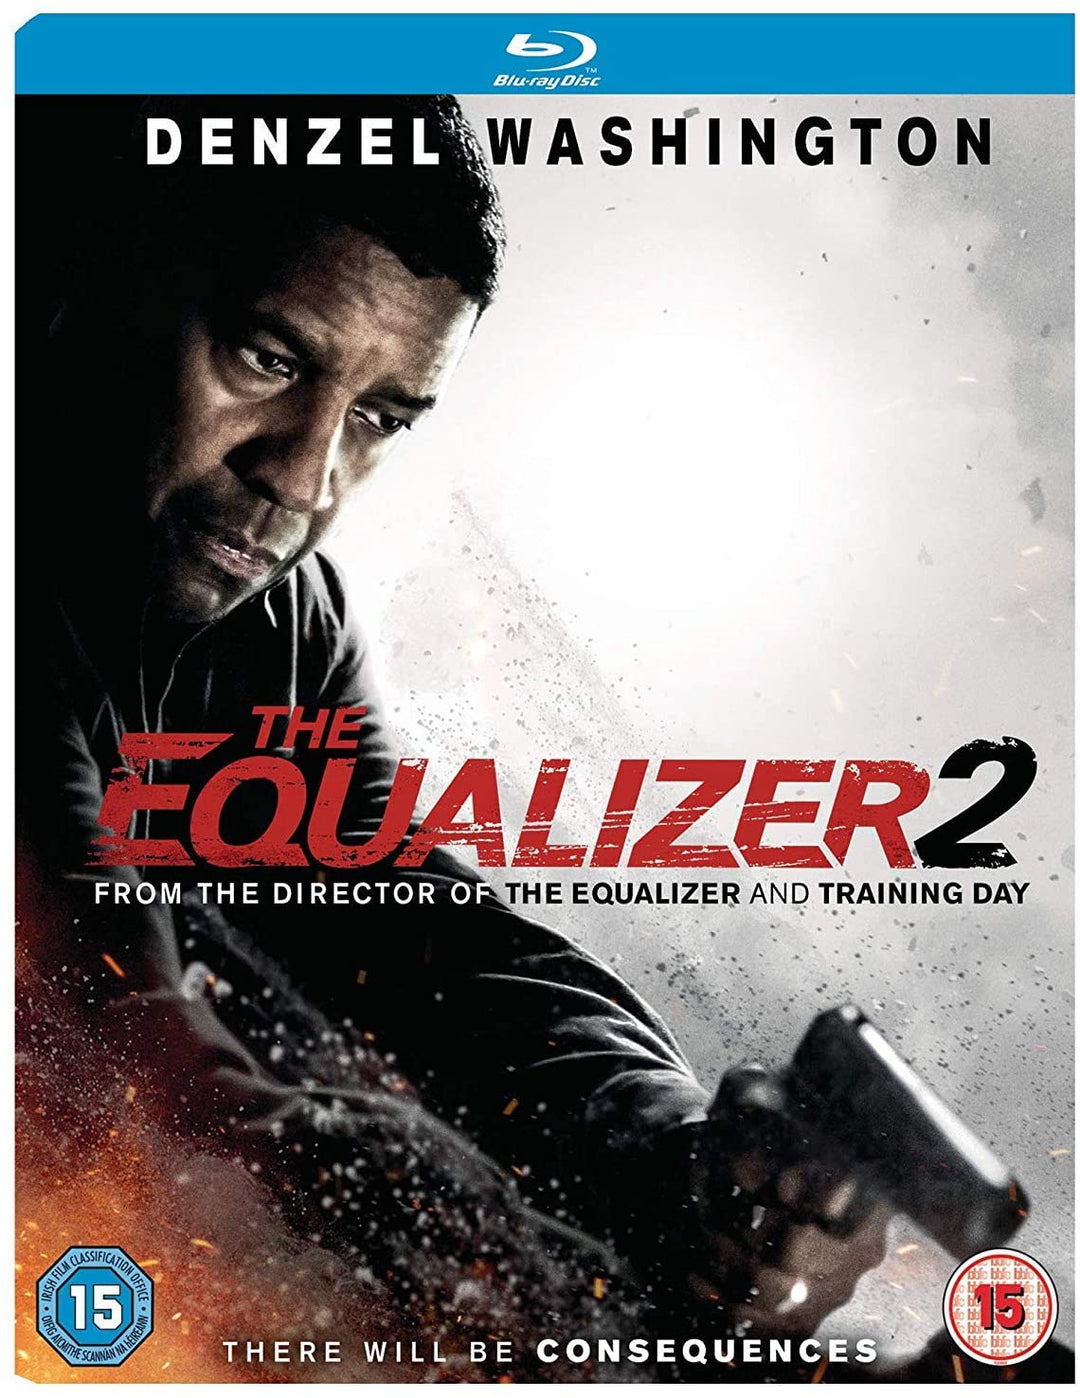 The Equalizer 2 - Action/Thriller [Blu-ray]